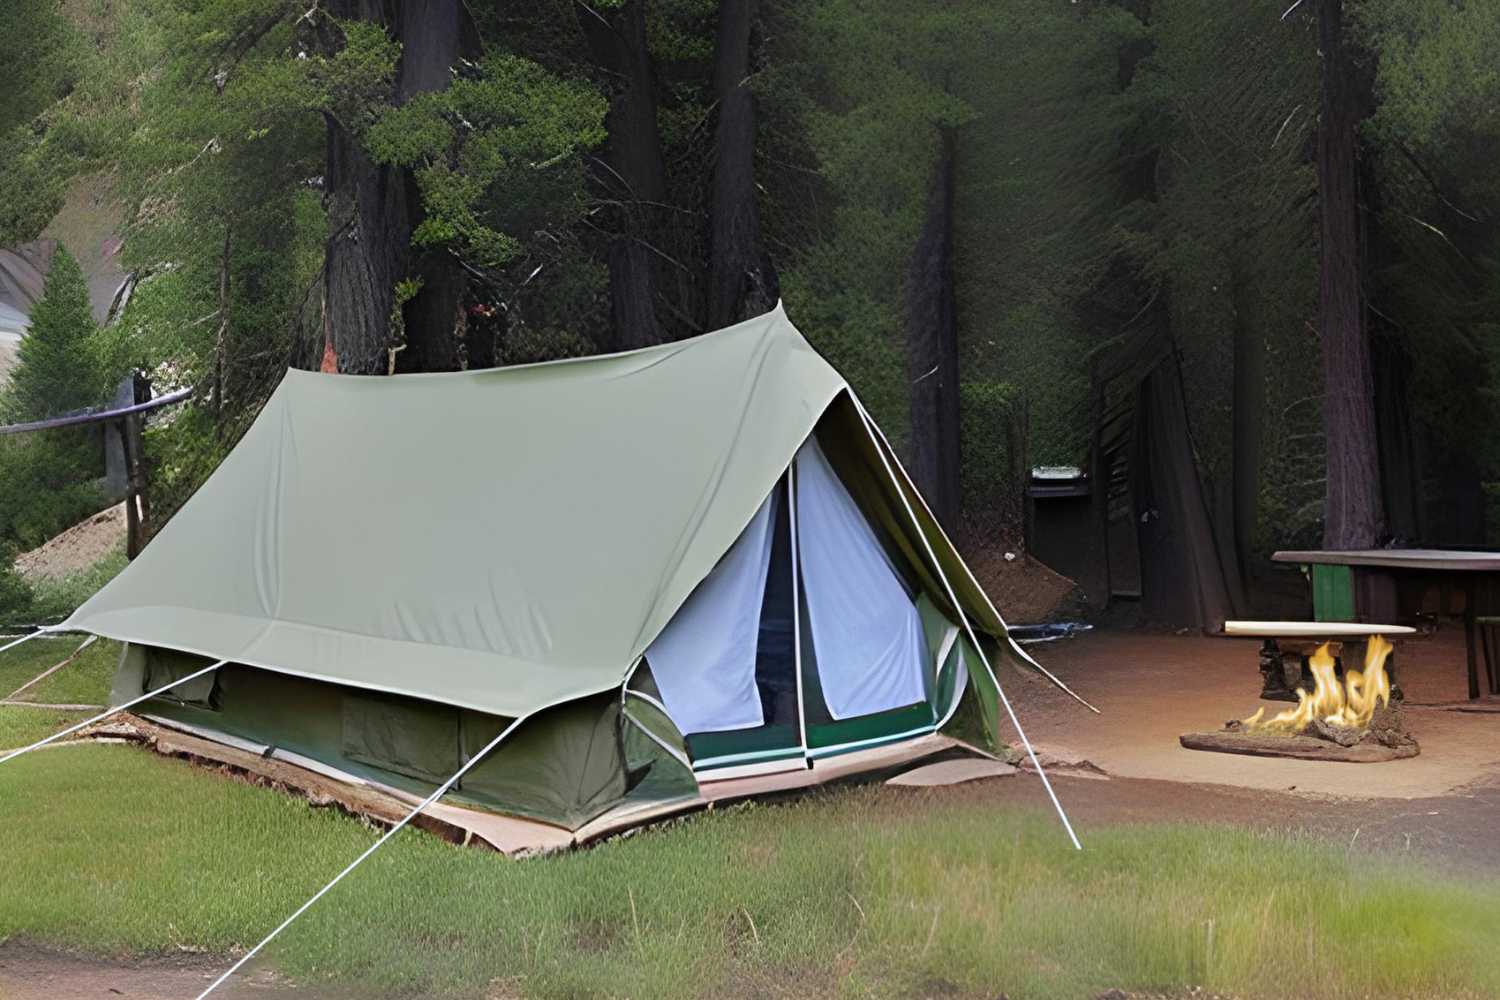 How to Choose the Best Tent for Camping